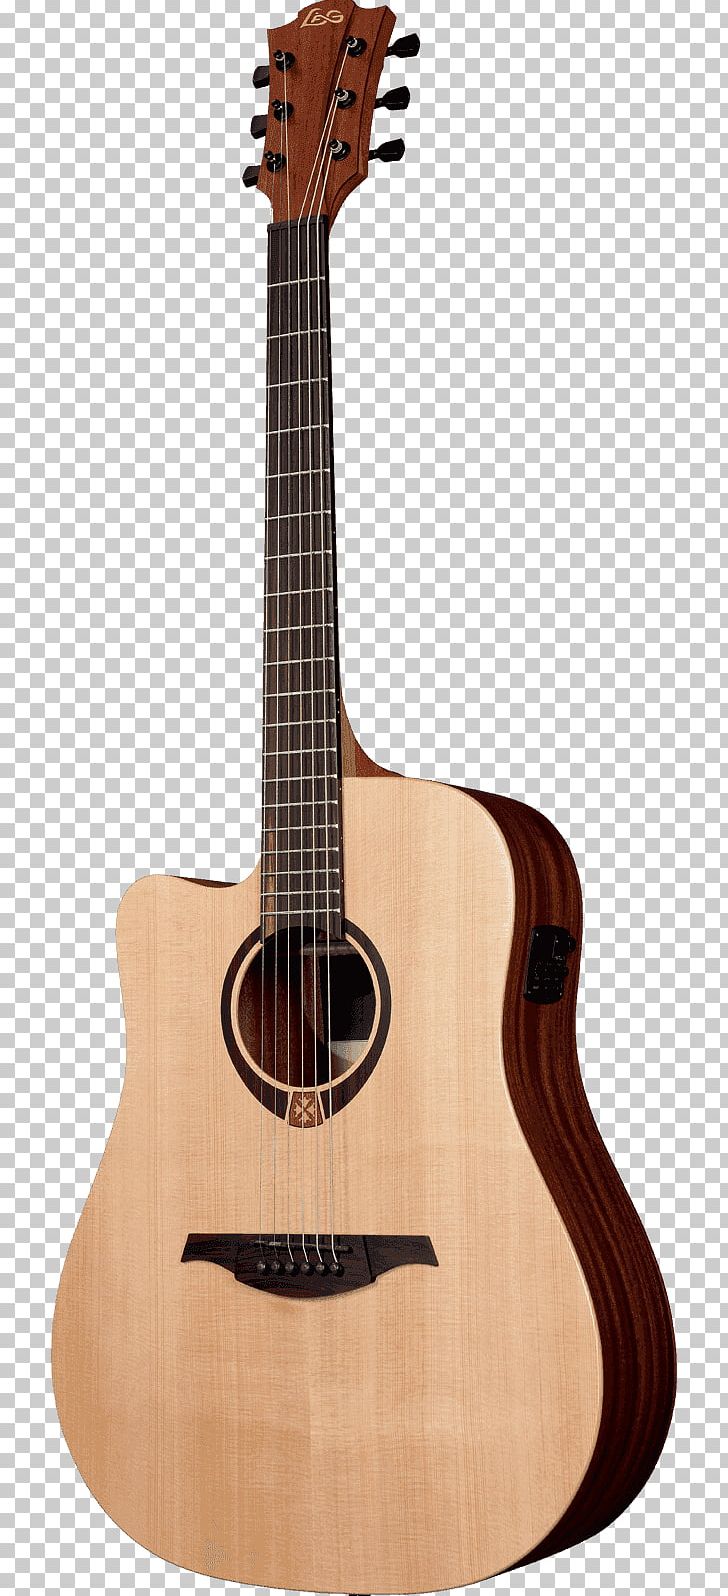 Acoustic Guitar Acoustic-electric Guitar Seven-string Guitar Tiple Cuatro PNG, Clipart, Acoustic Electric Guitar, Classical Guitar, Cuatro, Guitar Accessory, Musical Instruments Free PNG Download